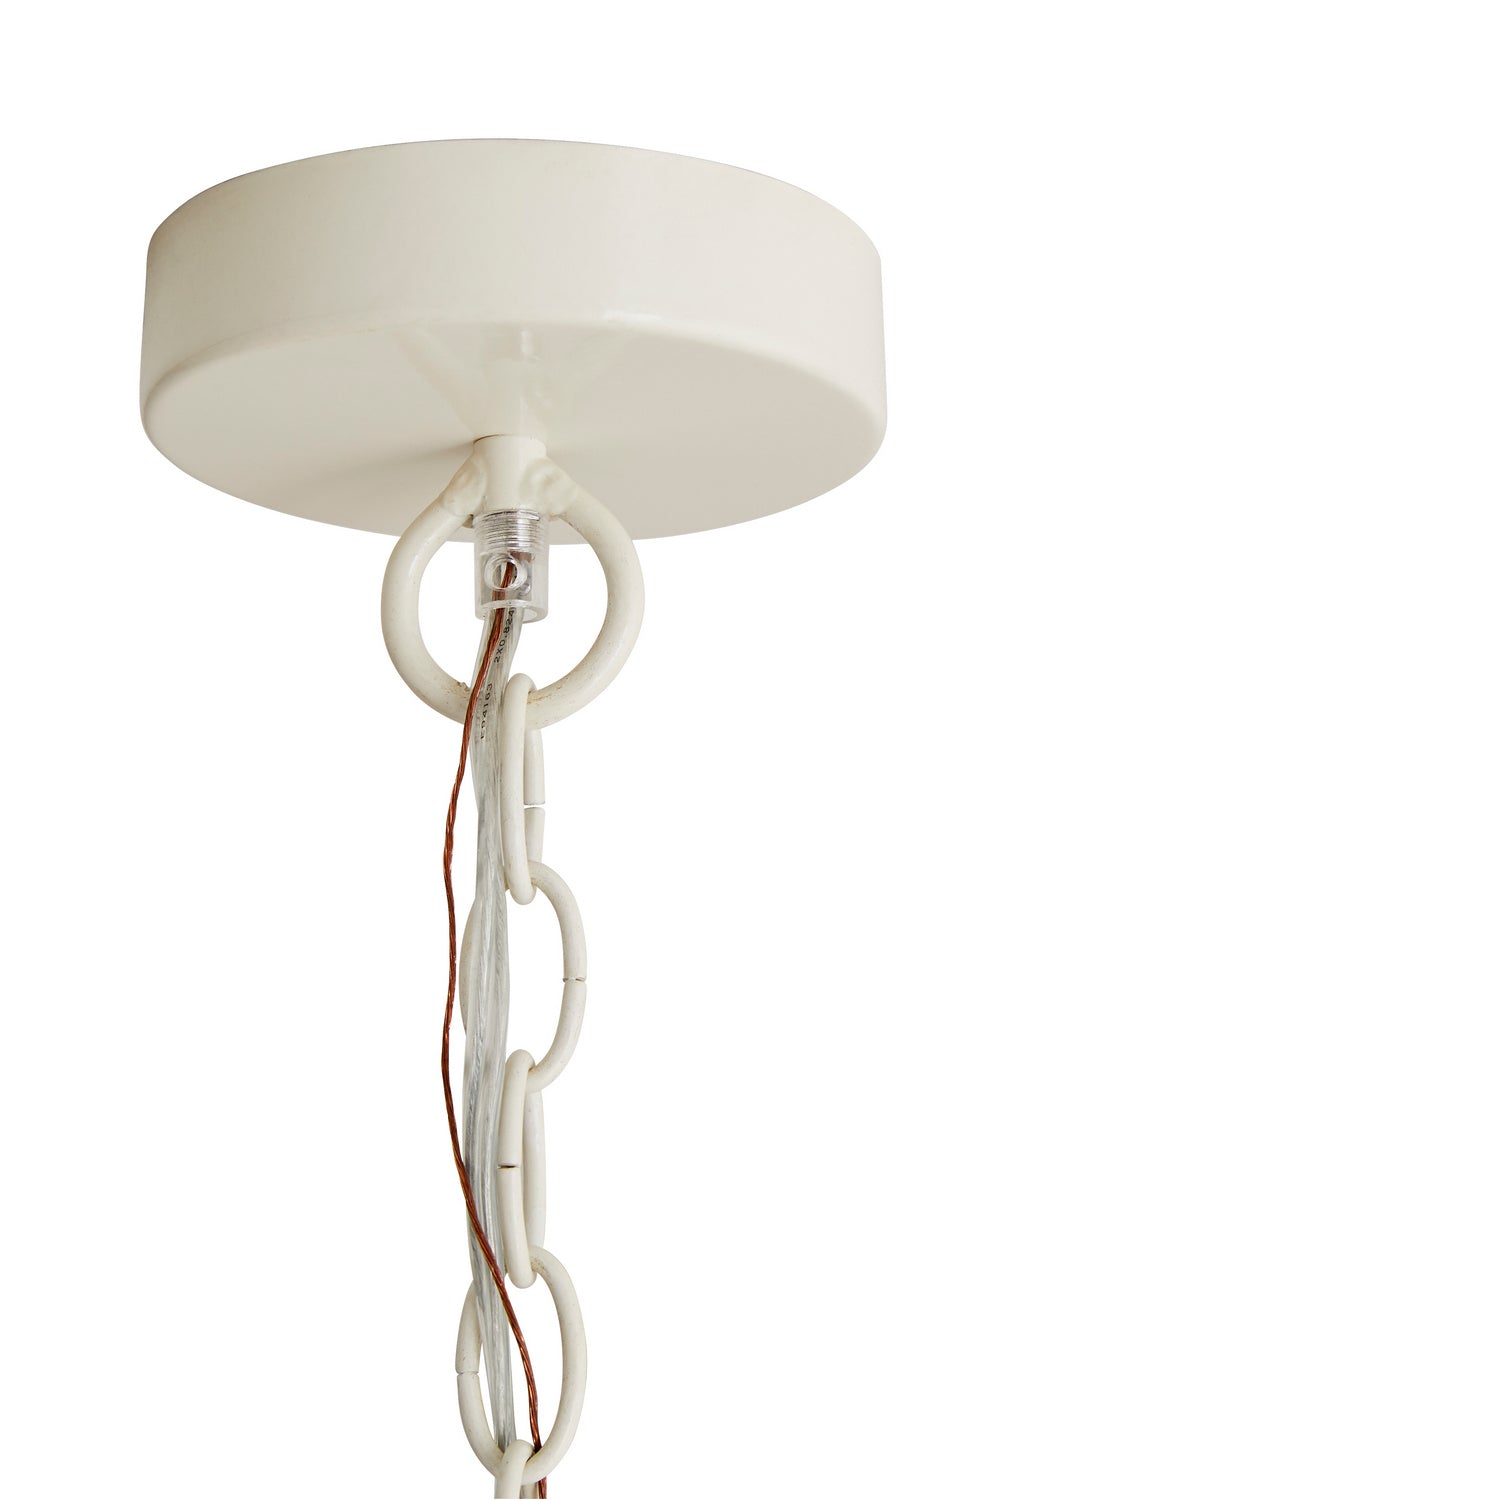 Six Light Chandelier from the Indi collection in White finish